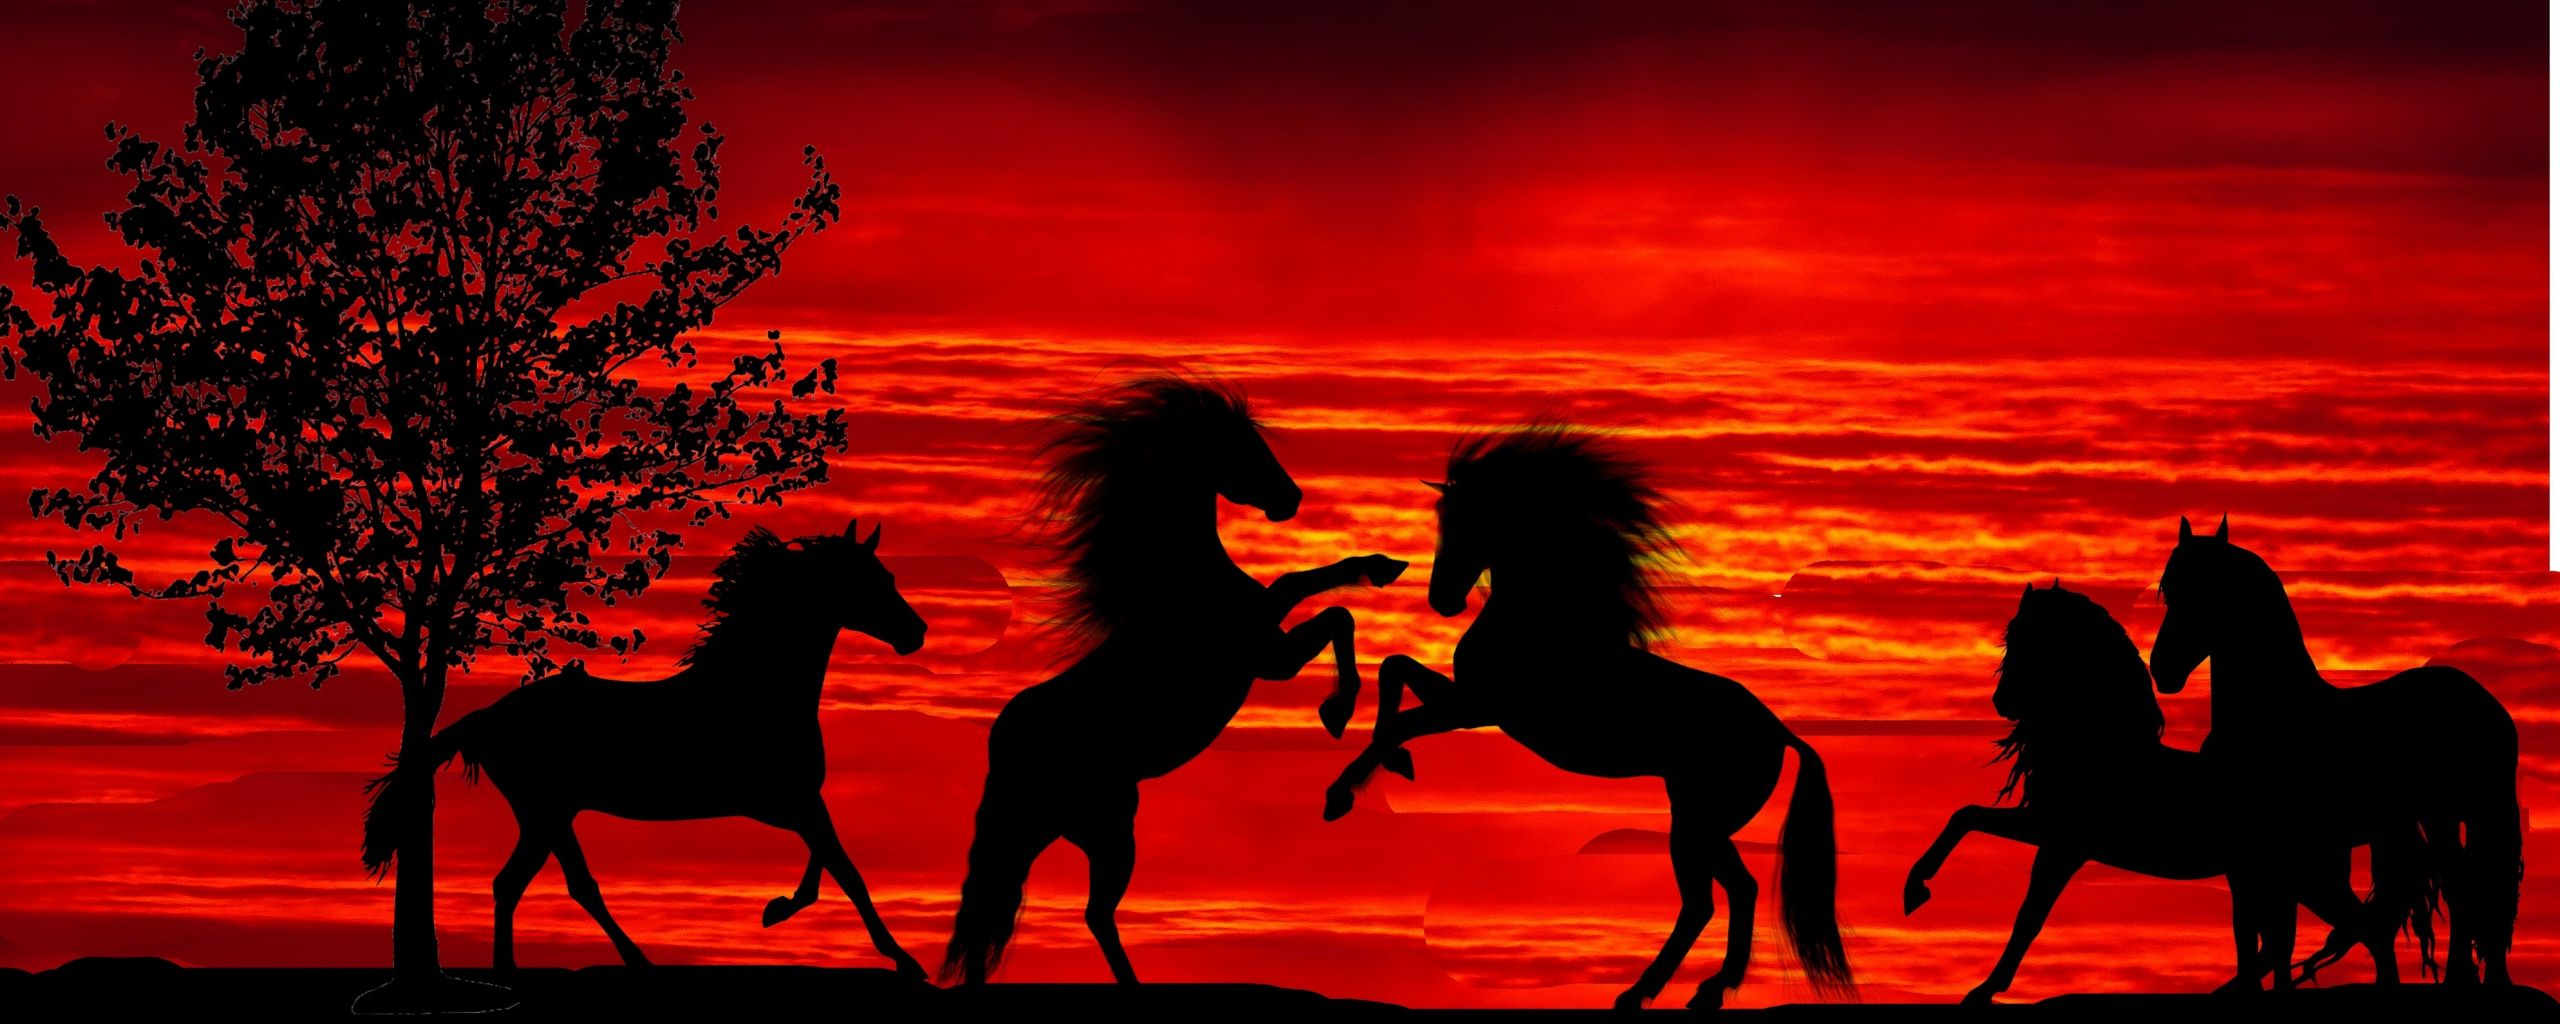 Horses In Sunset Wallpapers - Wallpaper Cave